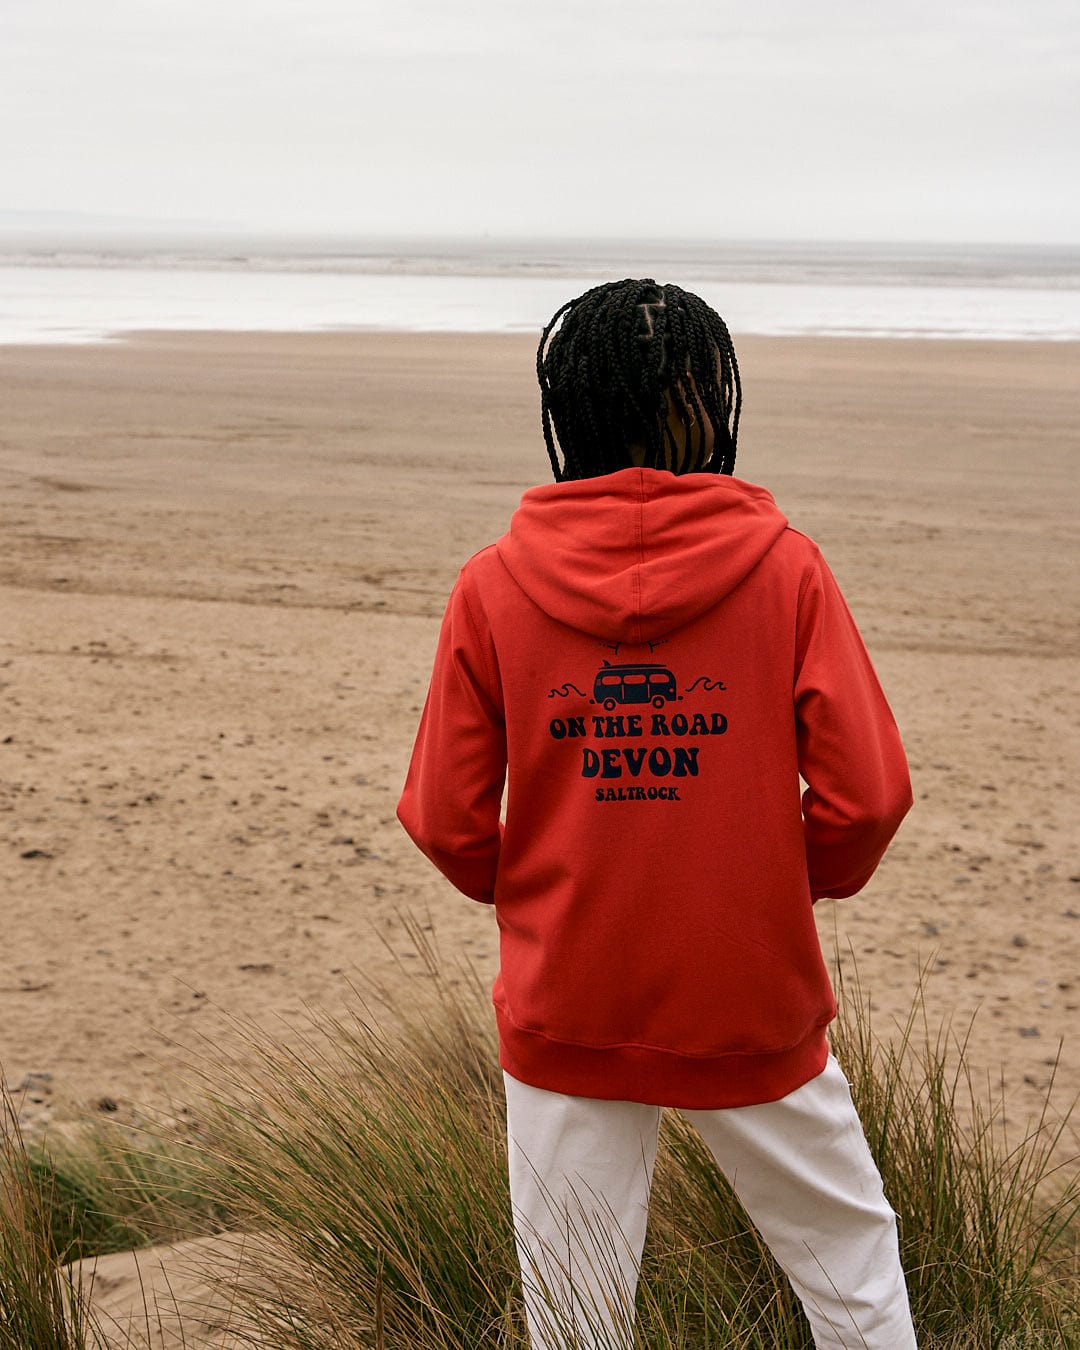 A woman wearing a Saltrock On The Road Devon - Womens Zip Hoodie - Red standing on the beach.